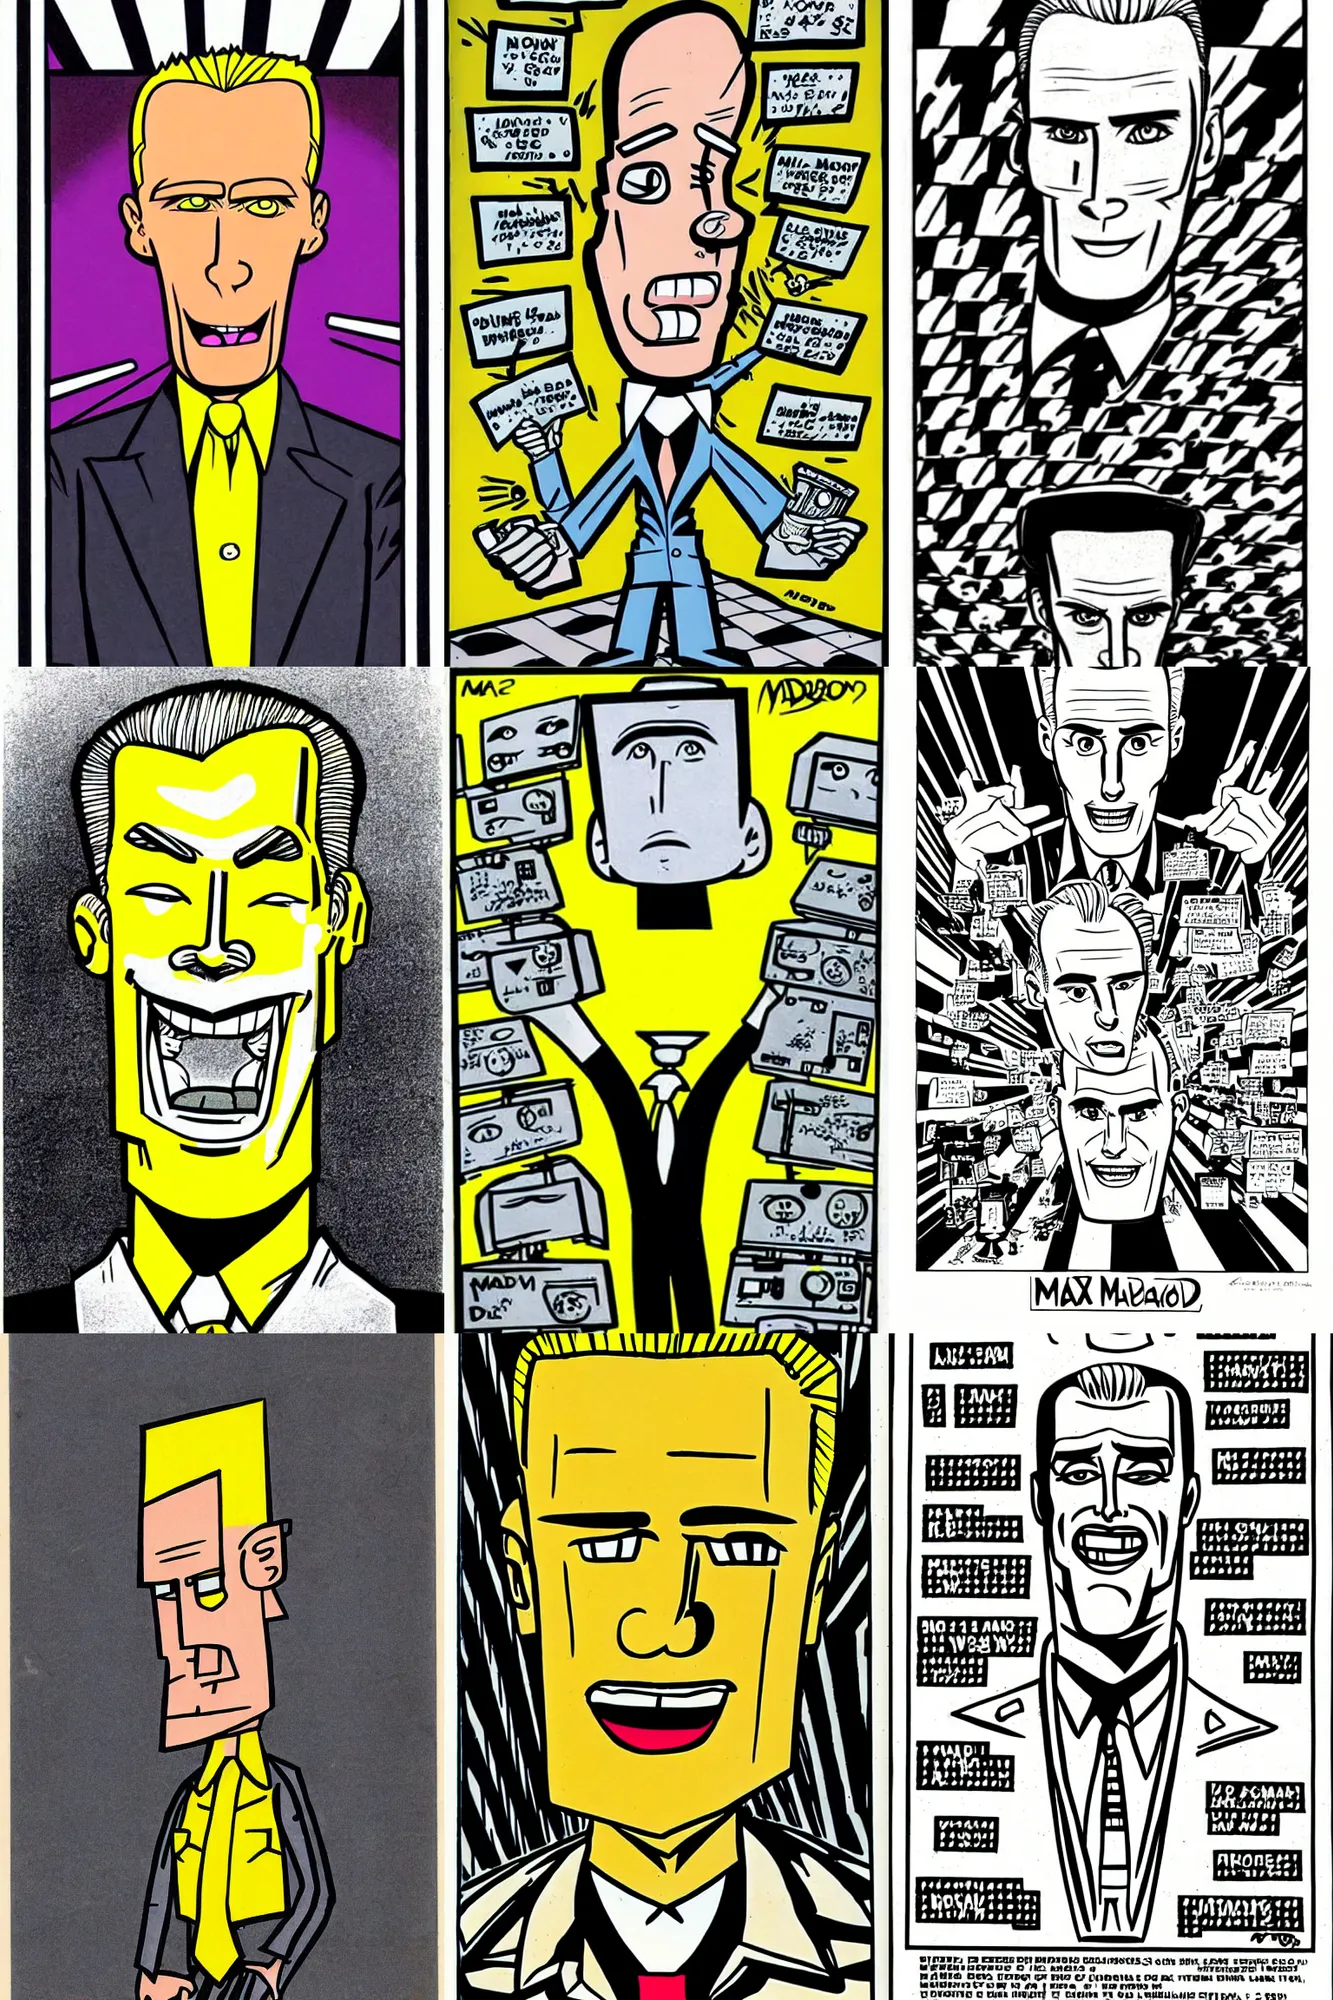 Prompt: max headroom drawn by don martin for mad magazine